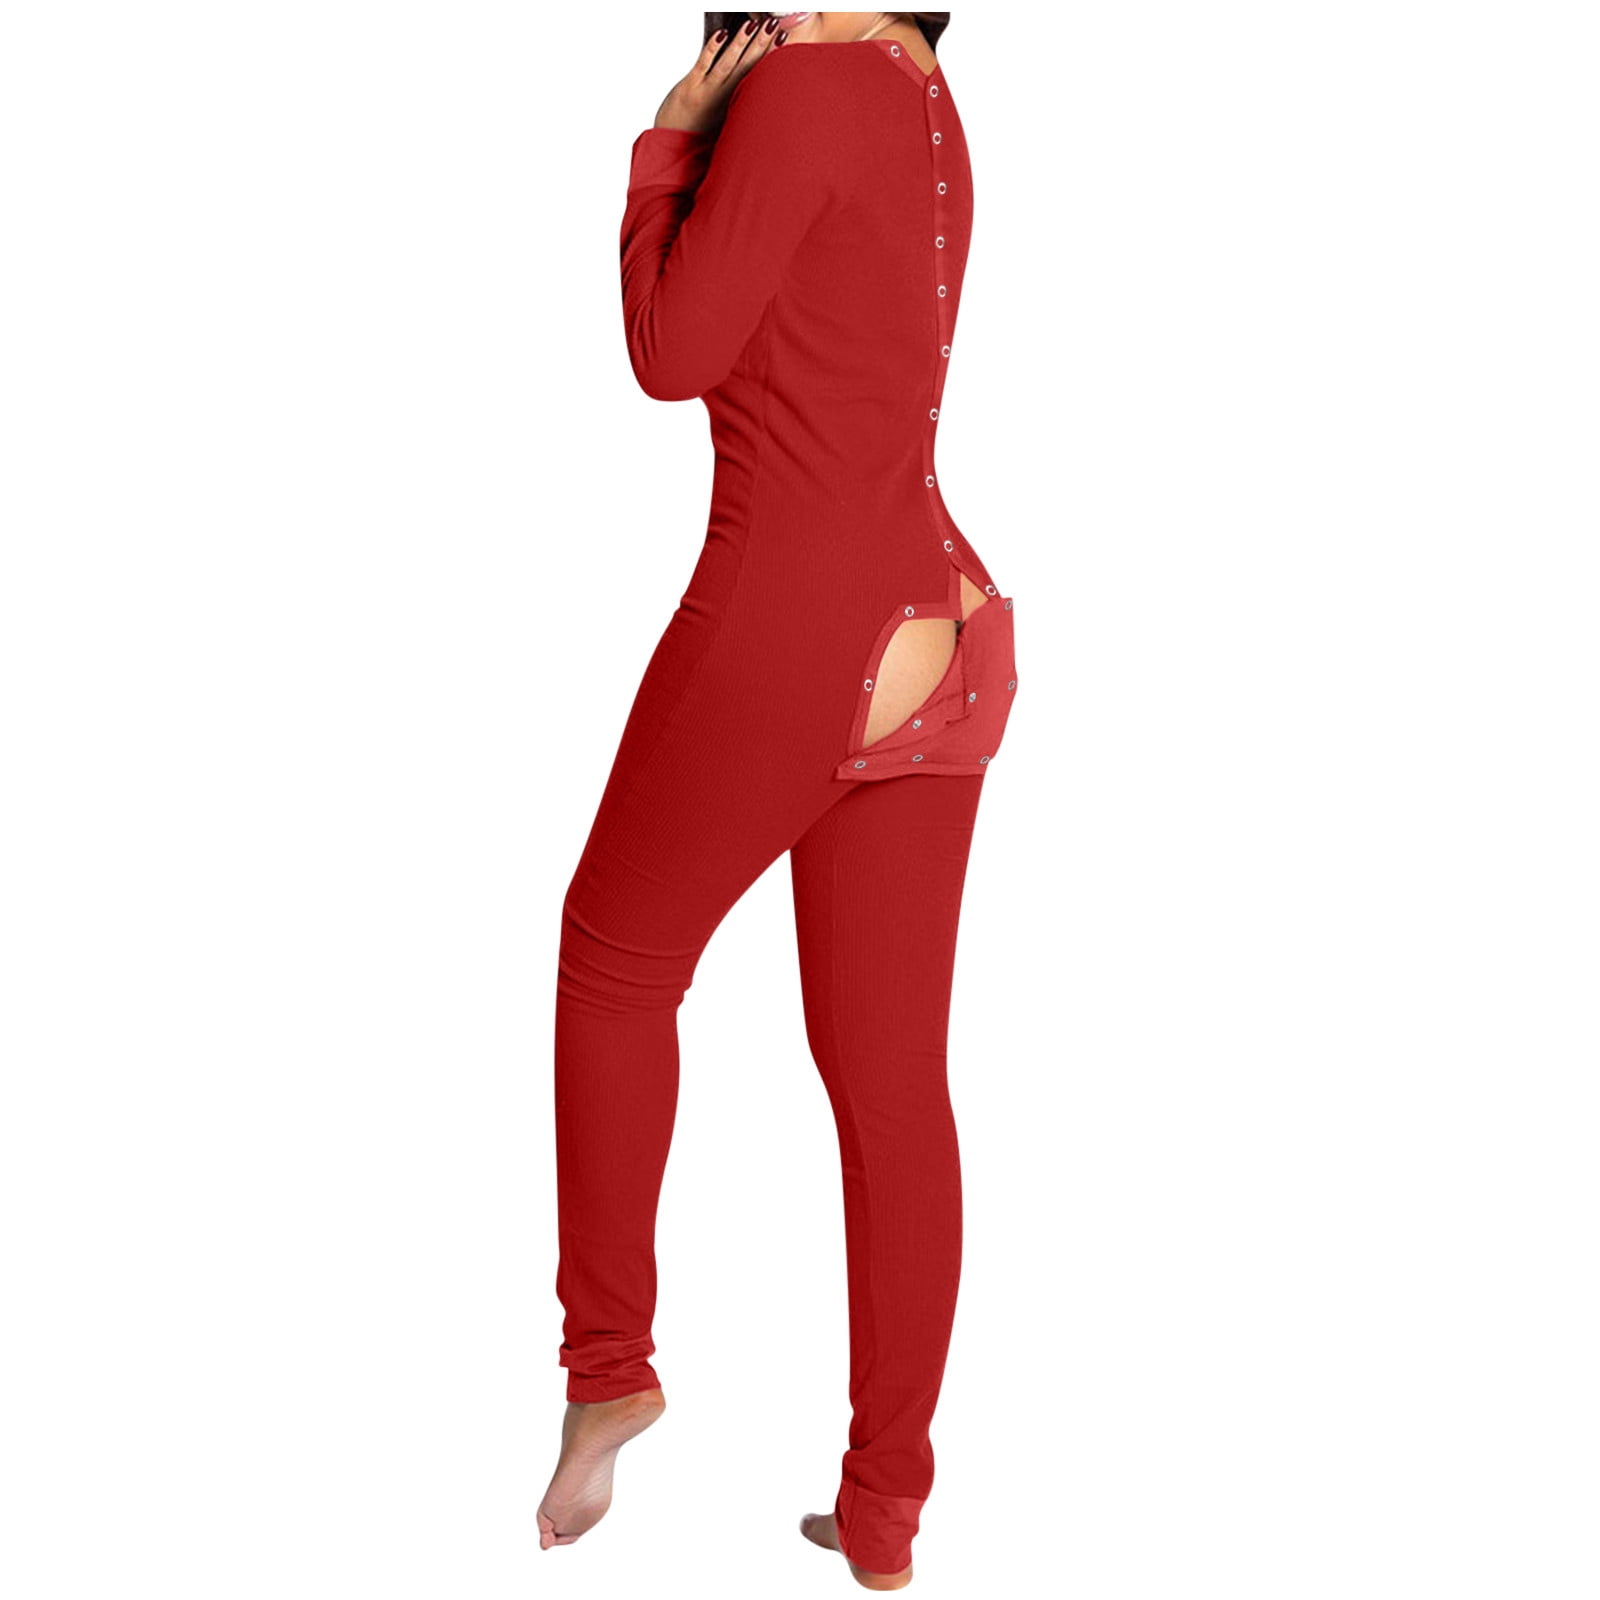 TAIAOJING Adult Button Onesie Pajamas Functional Women's Jumpsuit ...